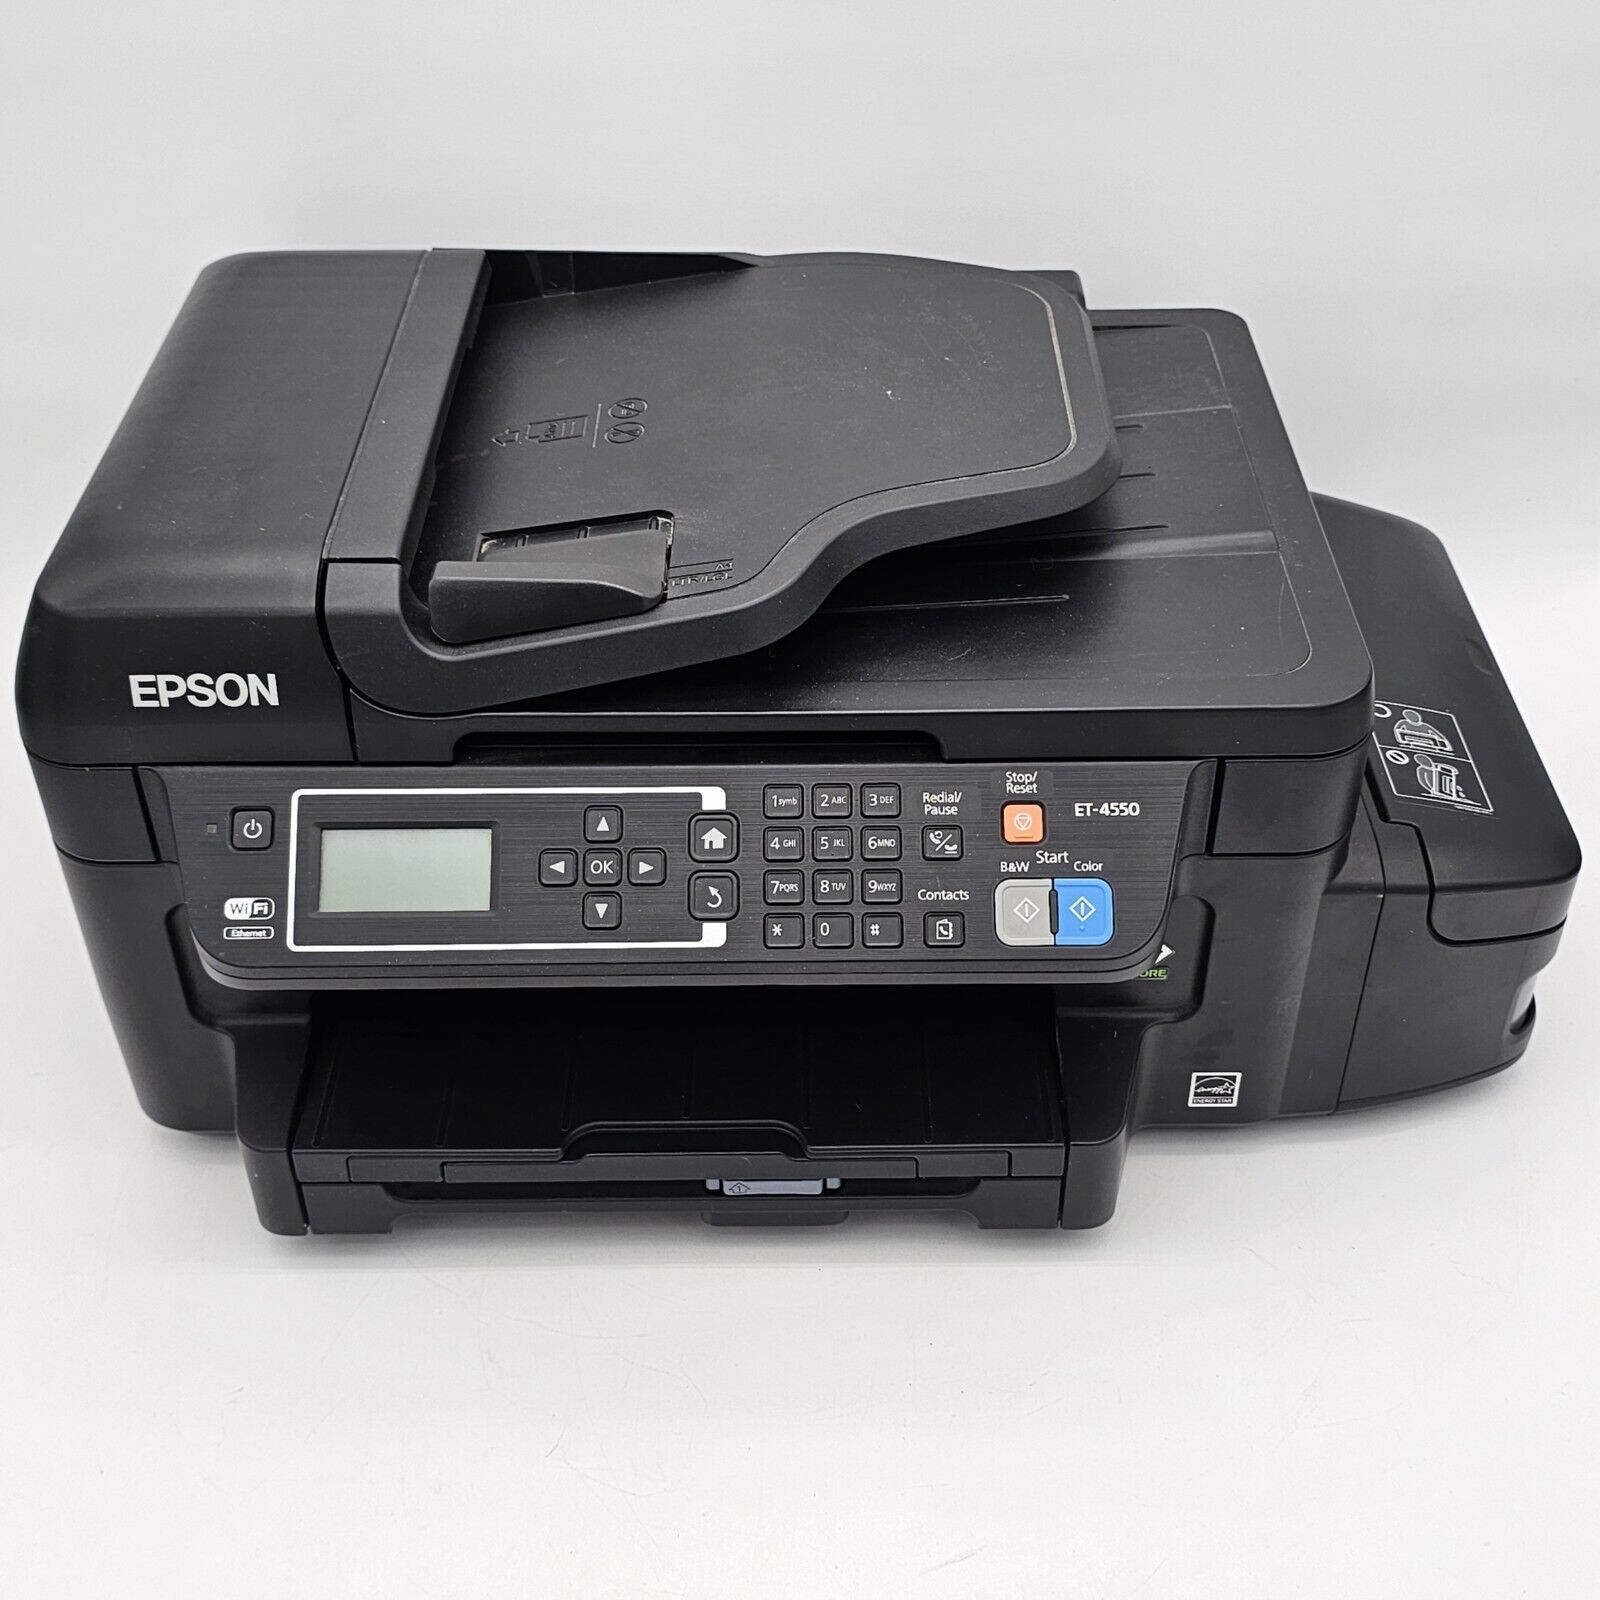 Epson WorkForce ET-4750 All-In-One Inkjet Printer Wifi Printer FOR PARTS READ